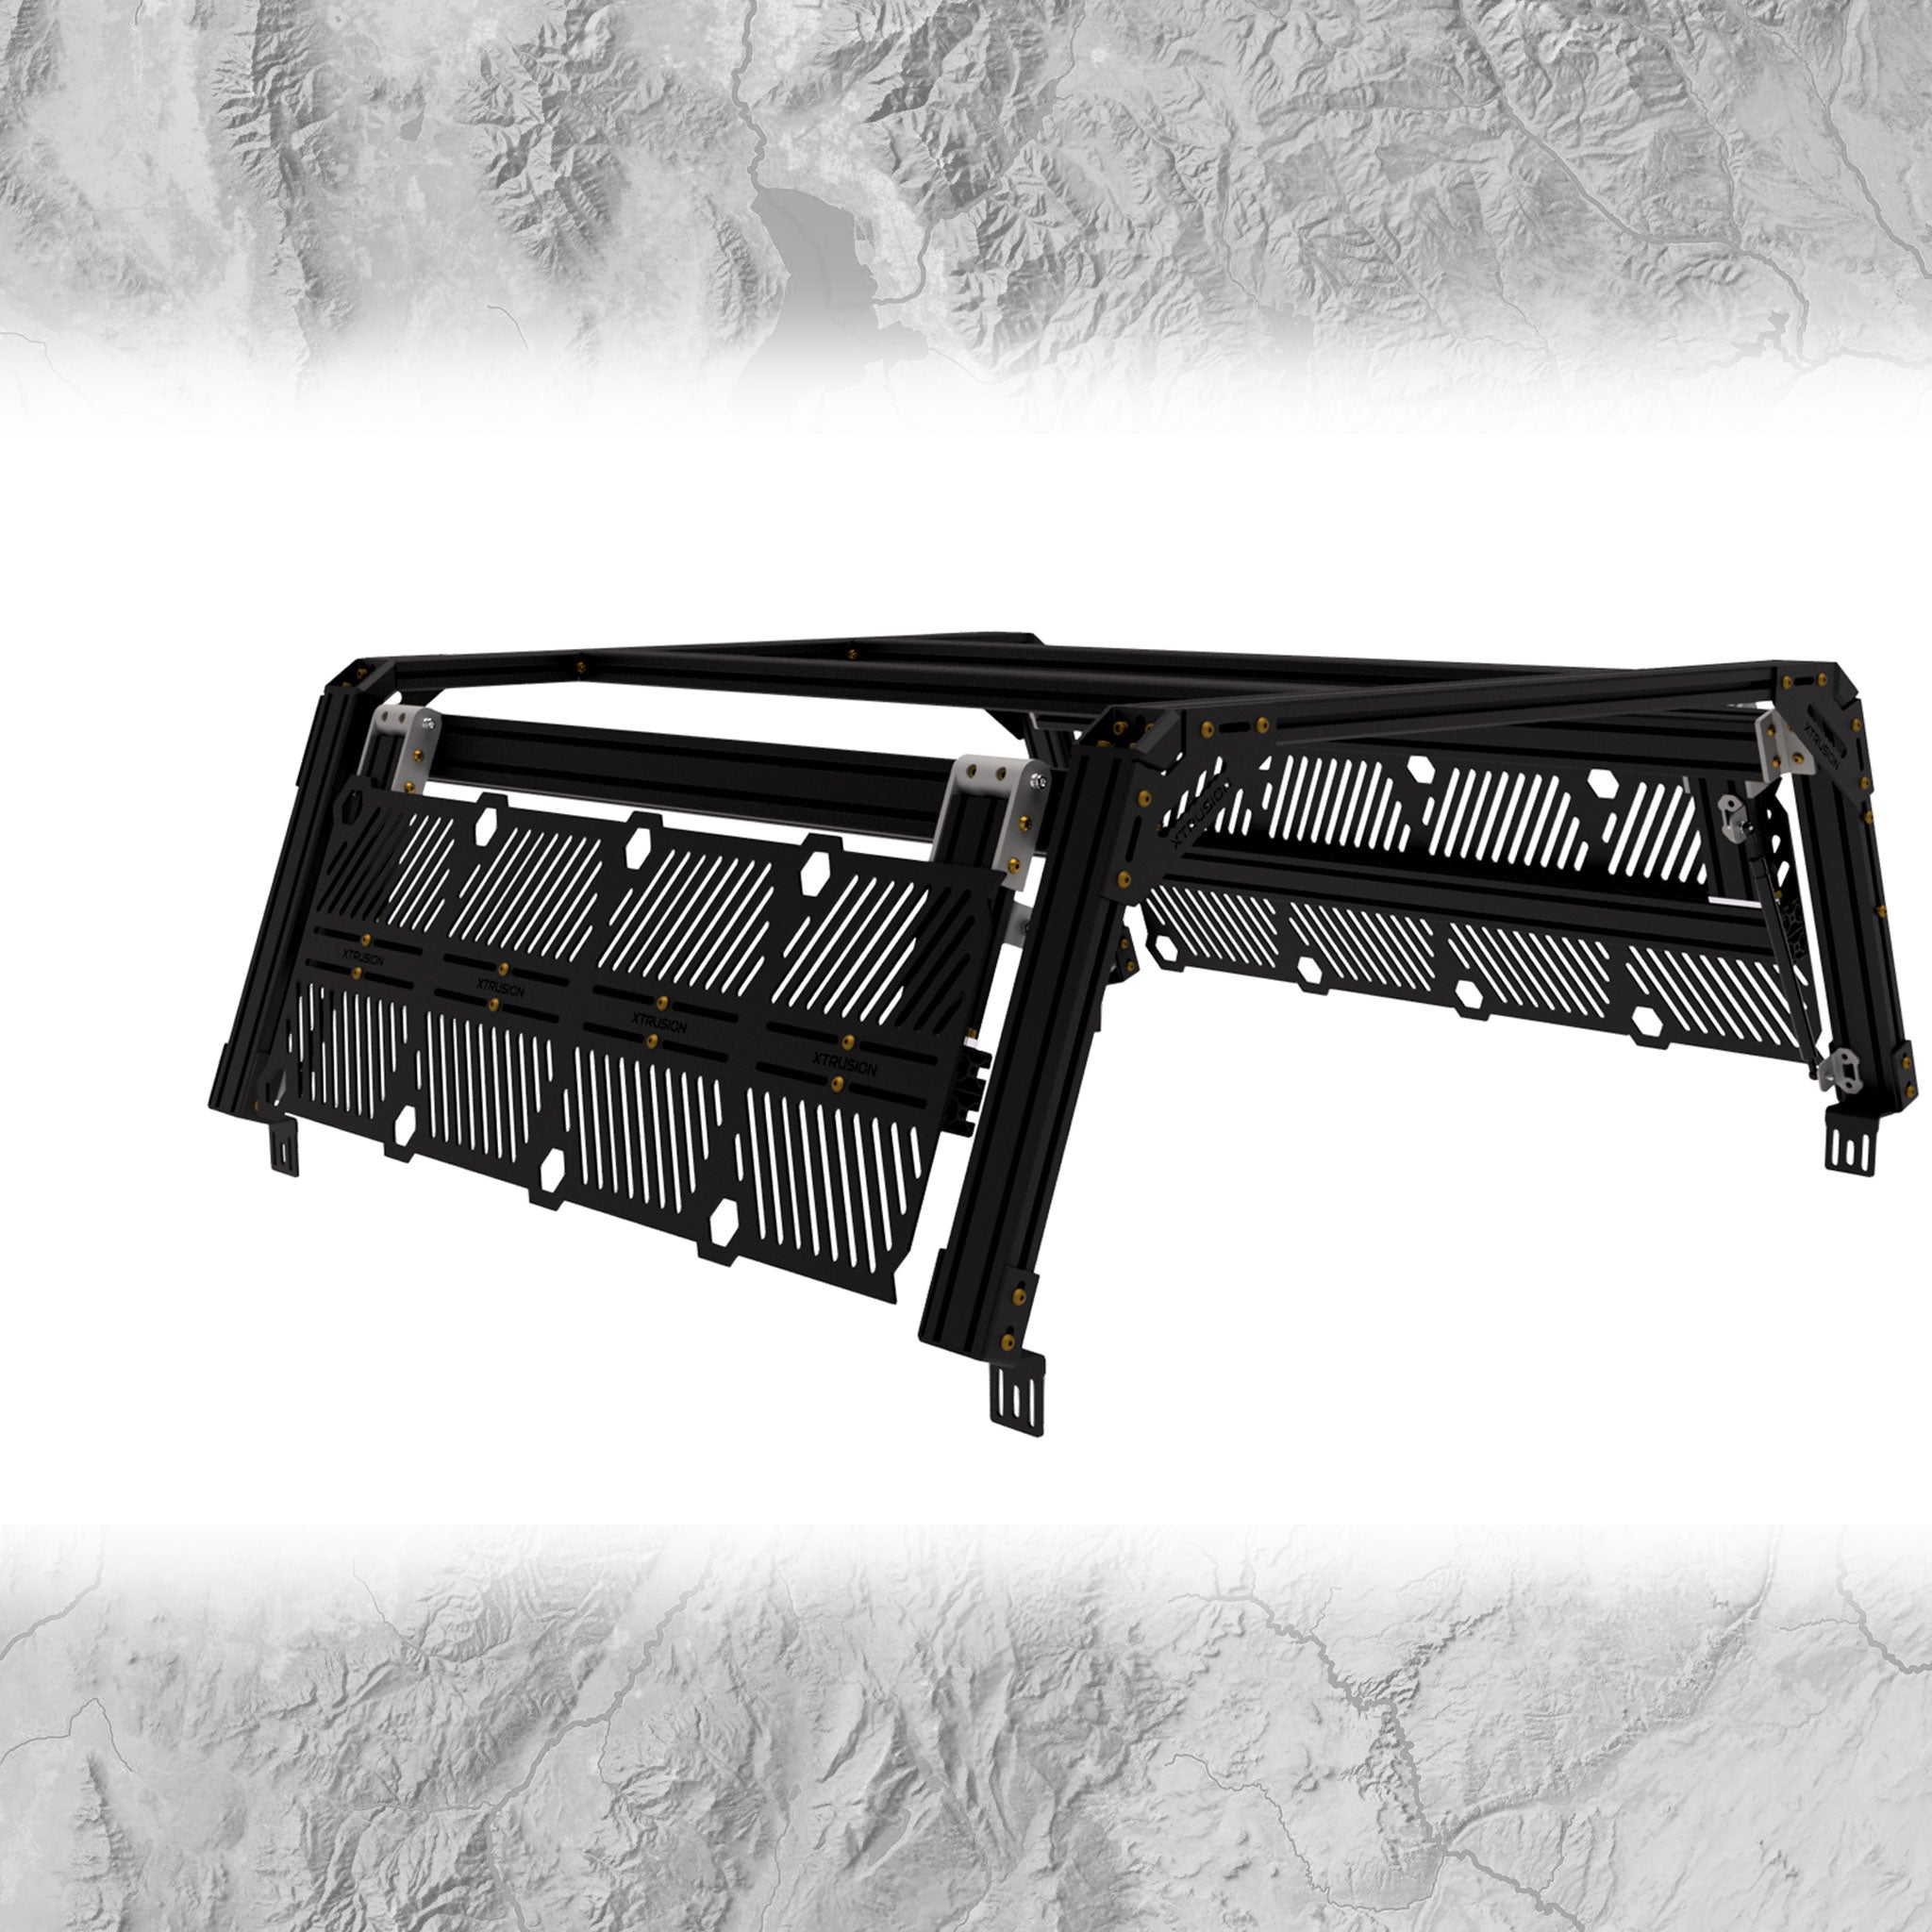 Image of Closed AXS Access Gate for easy side access on the XTR1 bed racks.